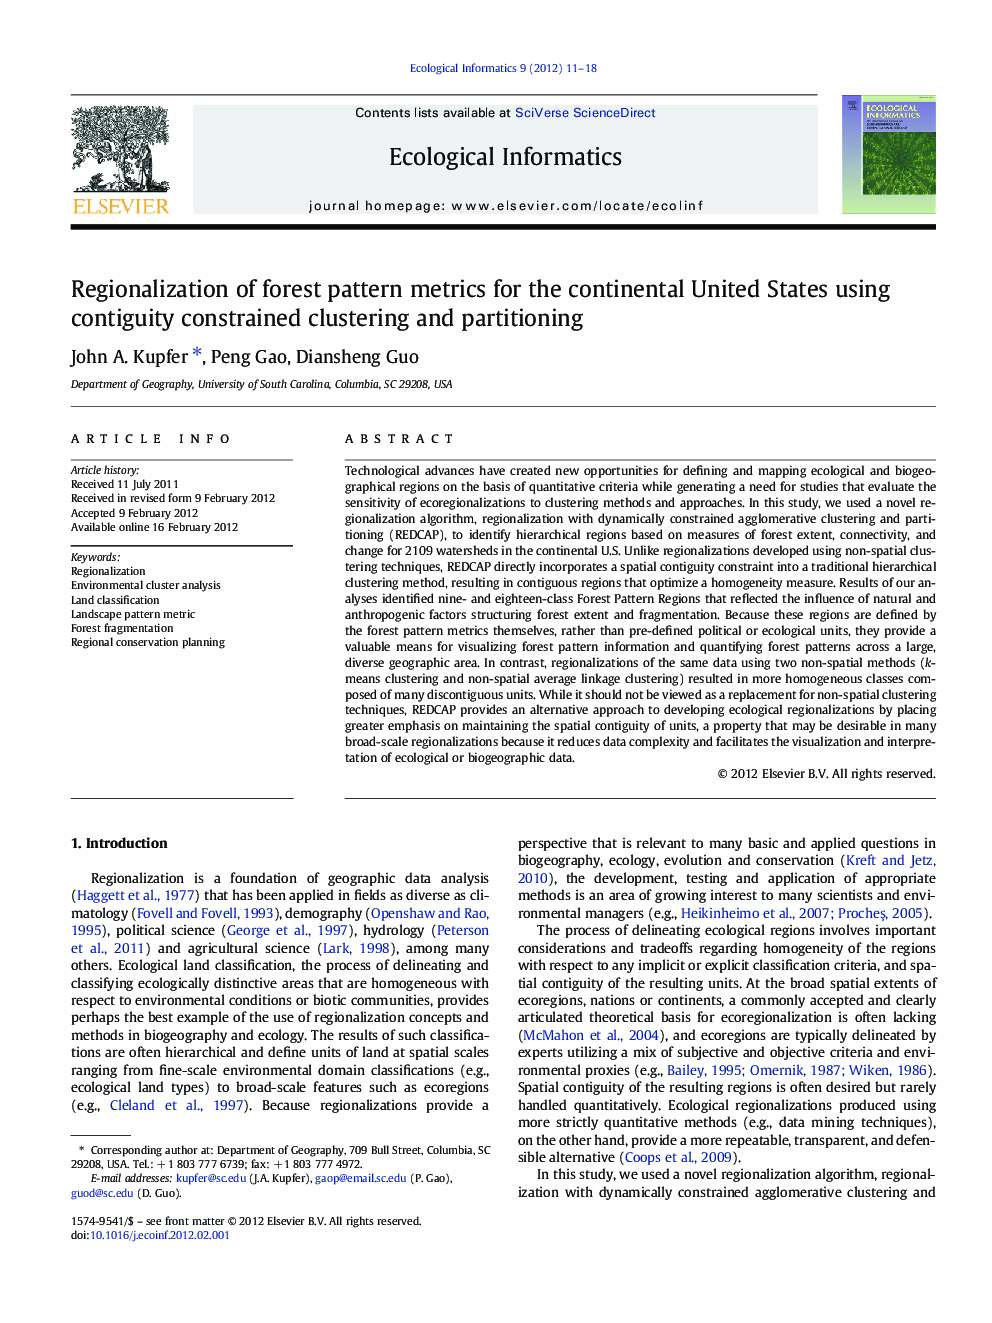 Regionalization of forest pattern metrics for the continental United States using contiguity constrained clustering and partitioning